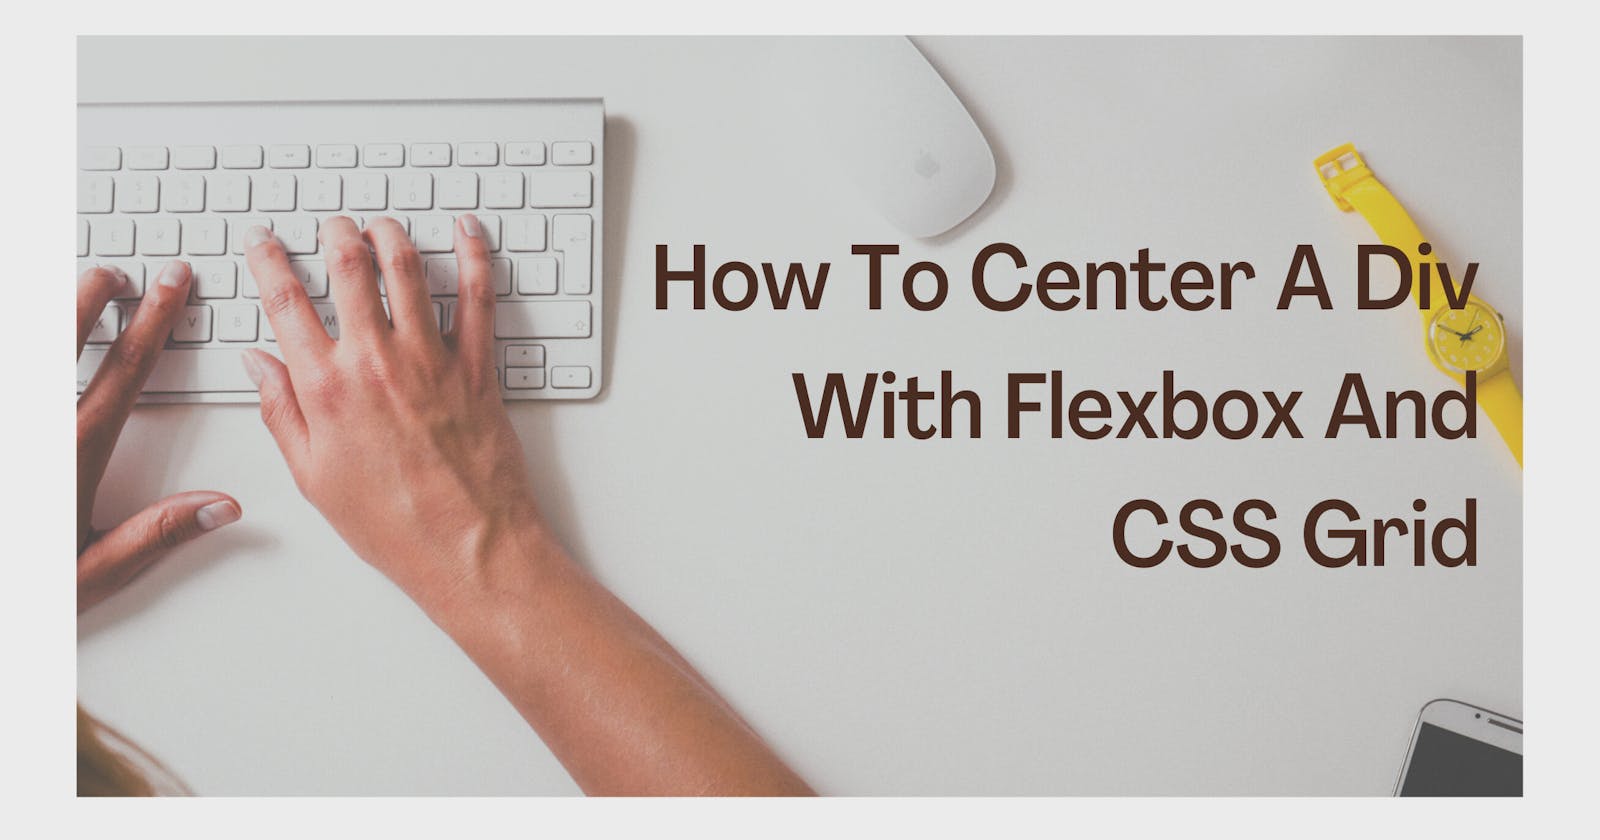 How to Center a Div with Flex box and CSS Grid